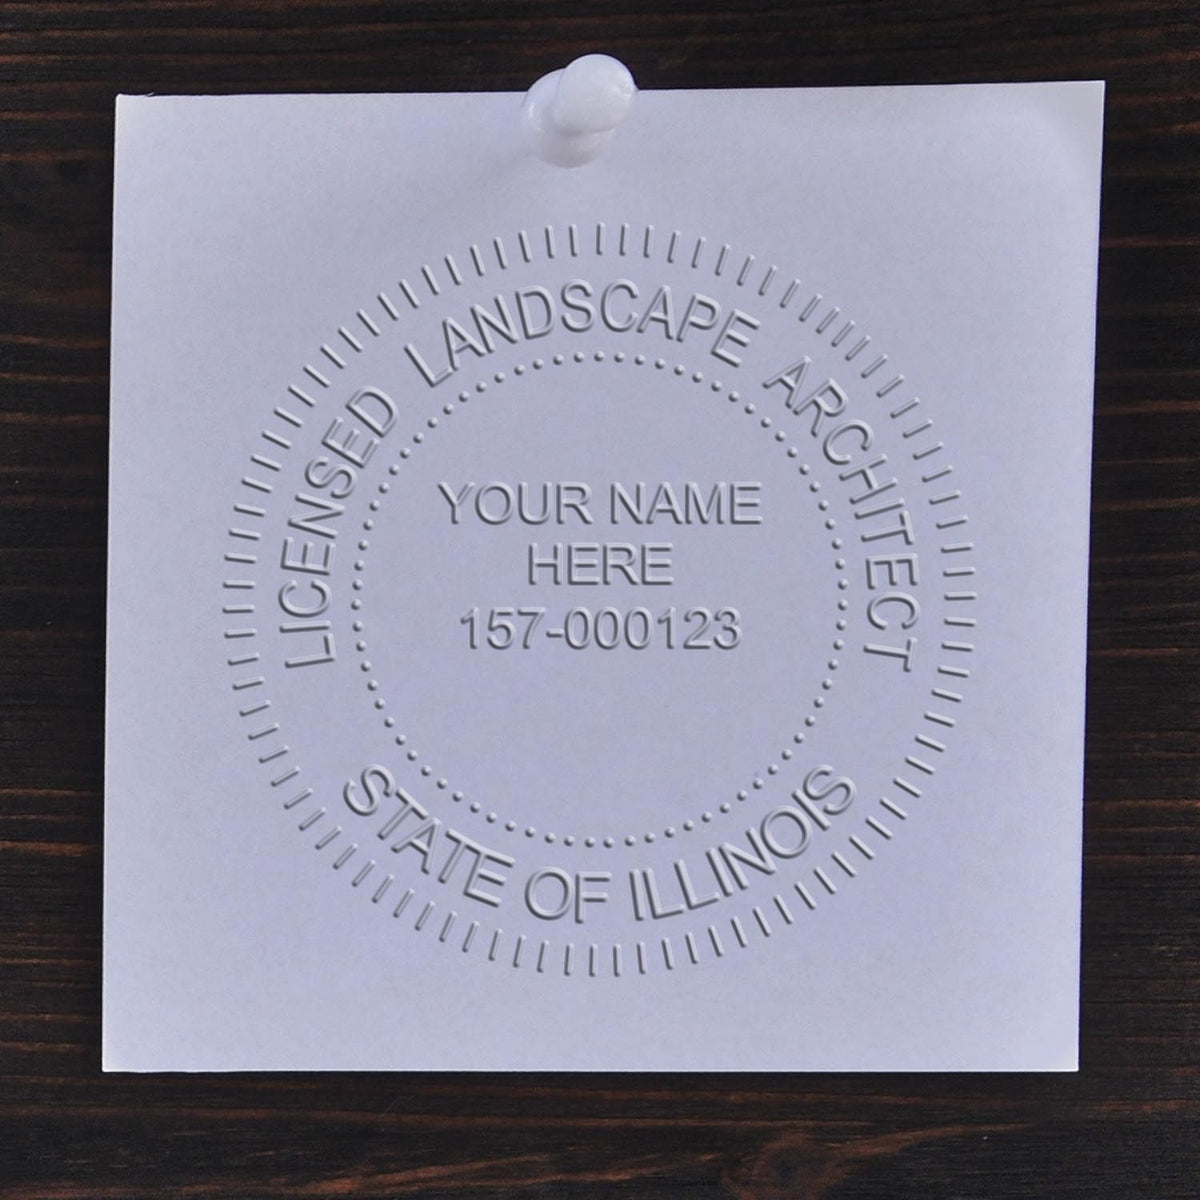 A stamped imprint of the Gift Illinois Landscape Architect Seal in this stylish lifestyle photo, setting the tone for a unique and personalized product.